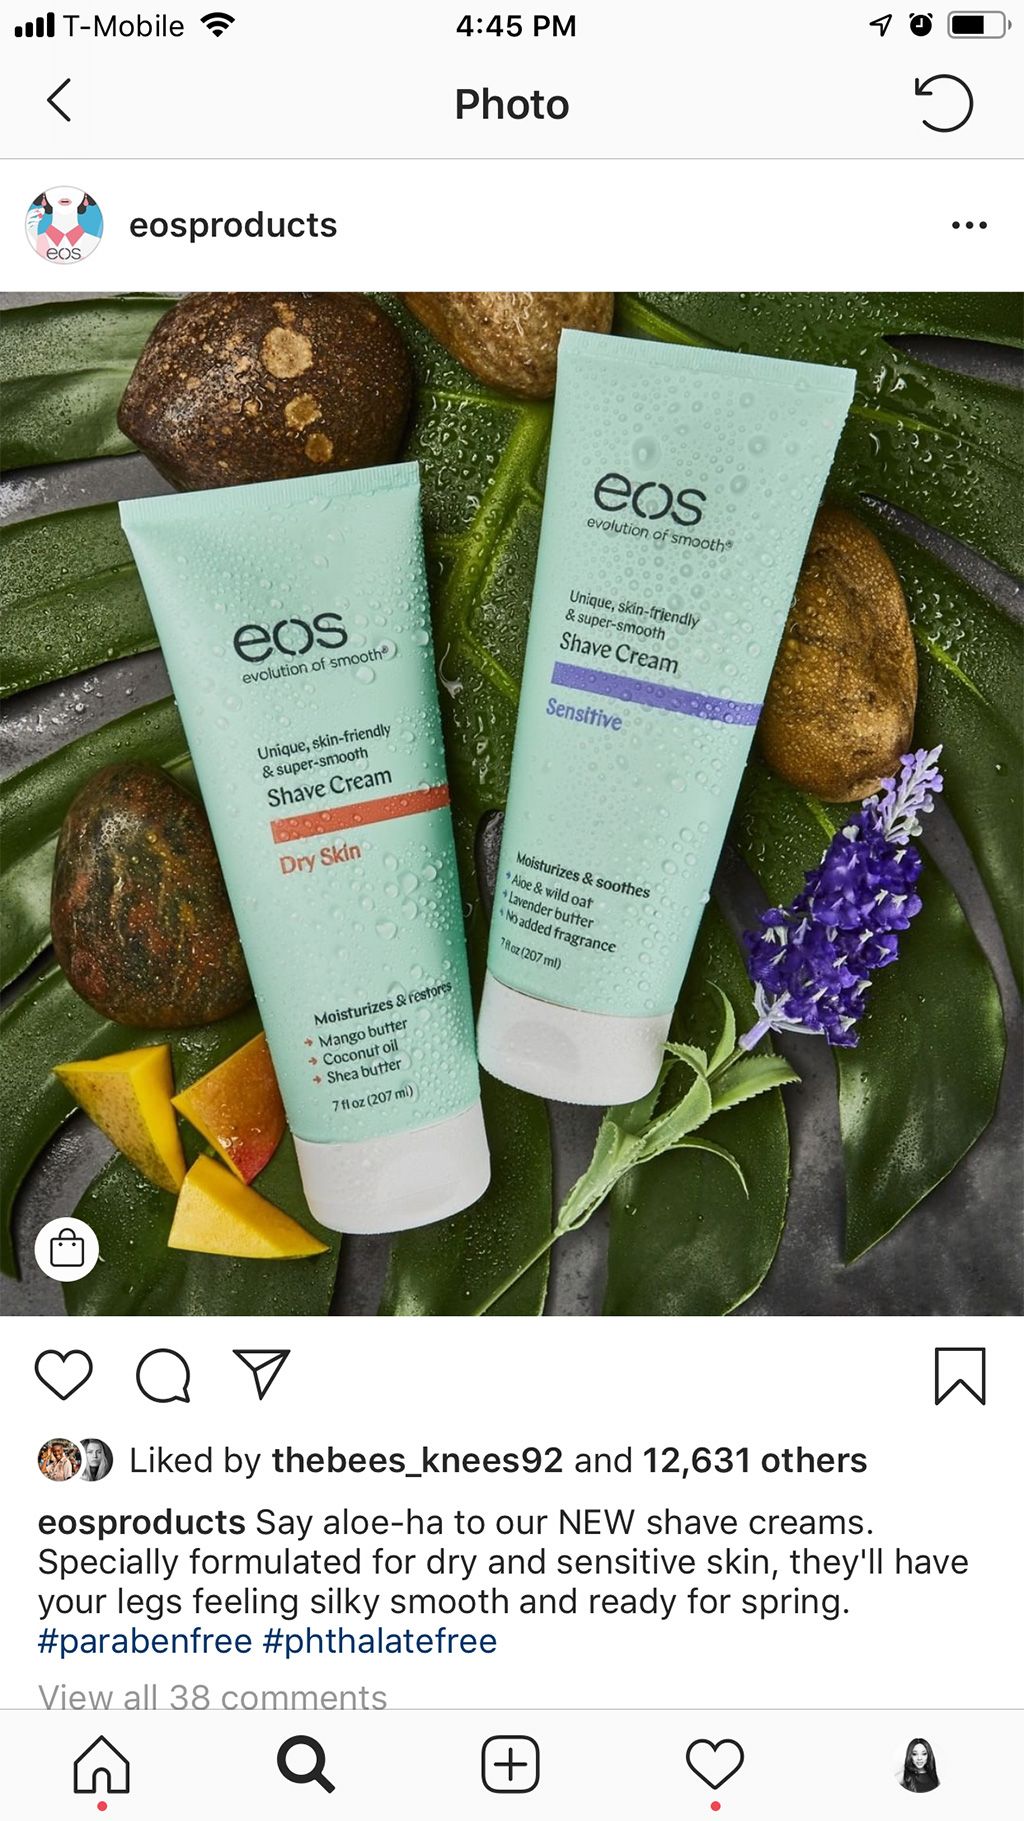 Screenshot of Instagram post for eosproducts showing their shave cream